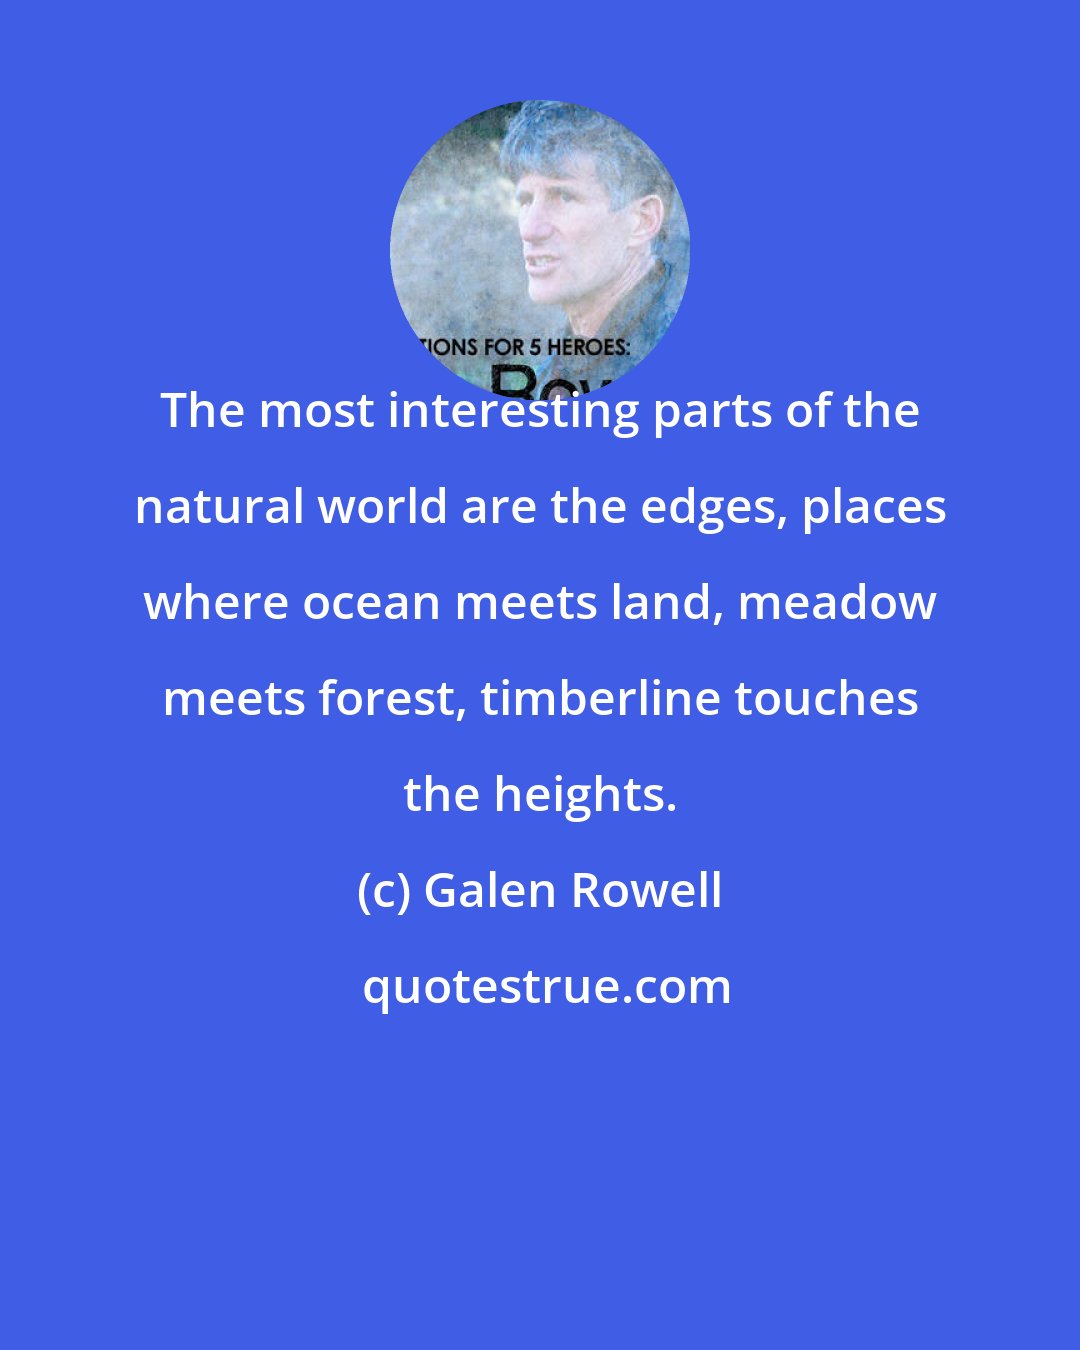 Galen Rowell: The most interesting parts of the natural world are the edges, places where ocean meets land, meadow meets forest, timberline touches the heights.